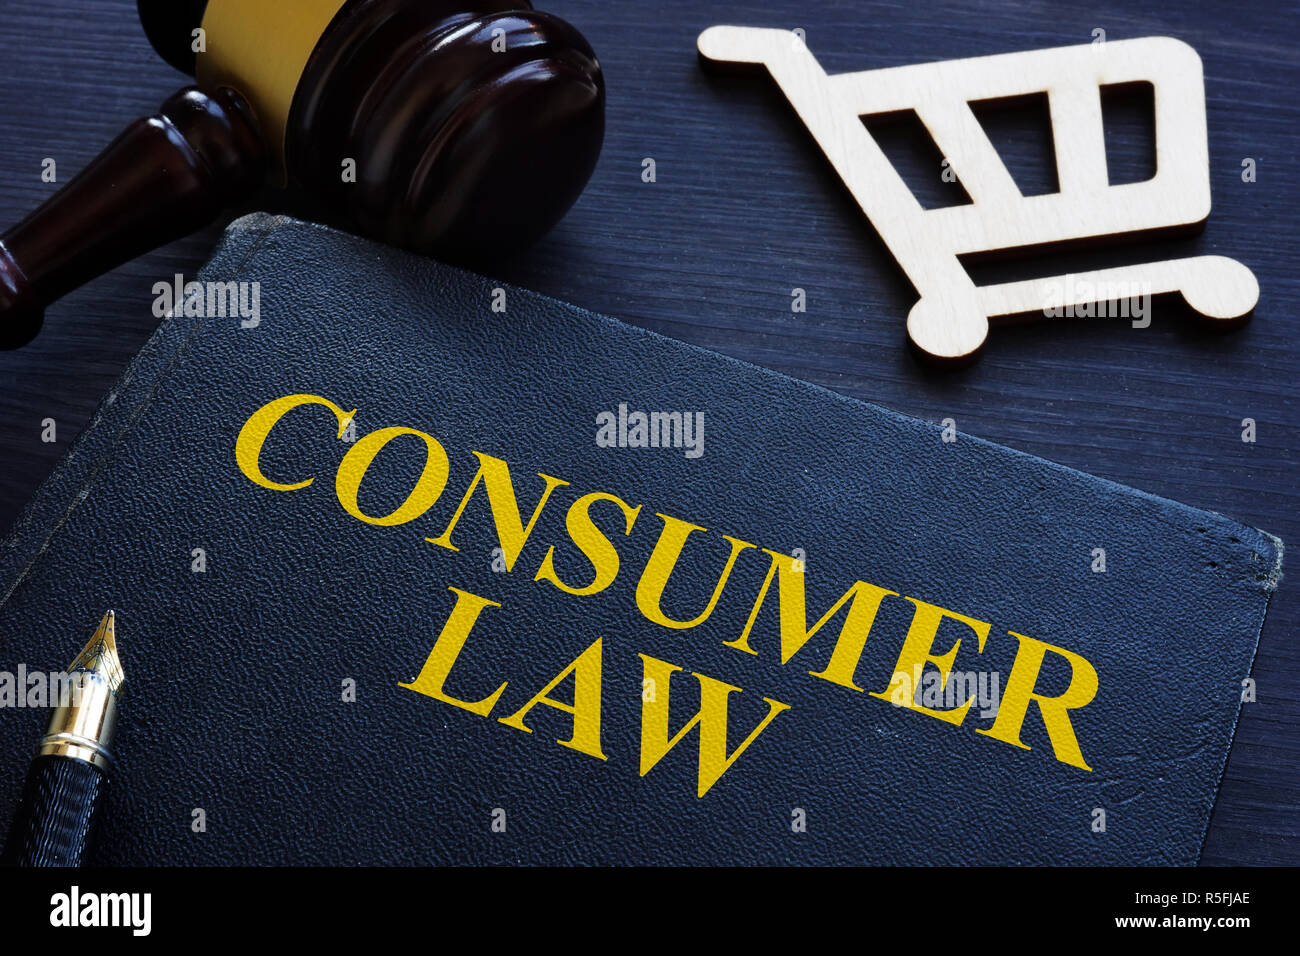 Consumer law, gavel and shopping cart on a desk. Stock Photo